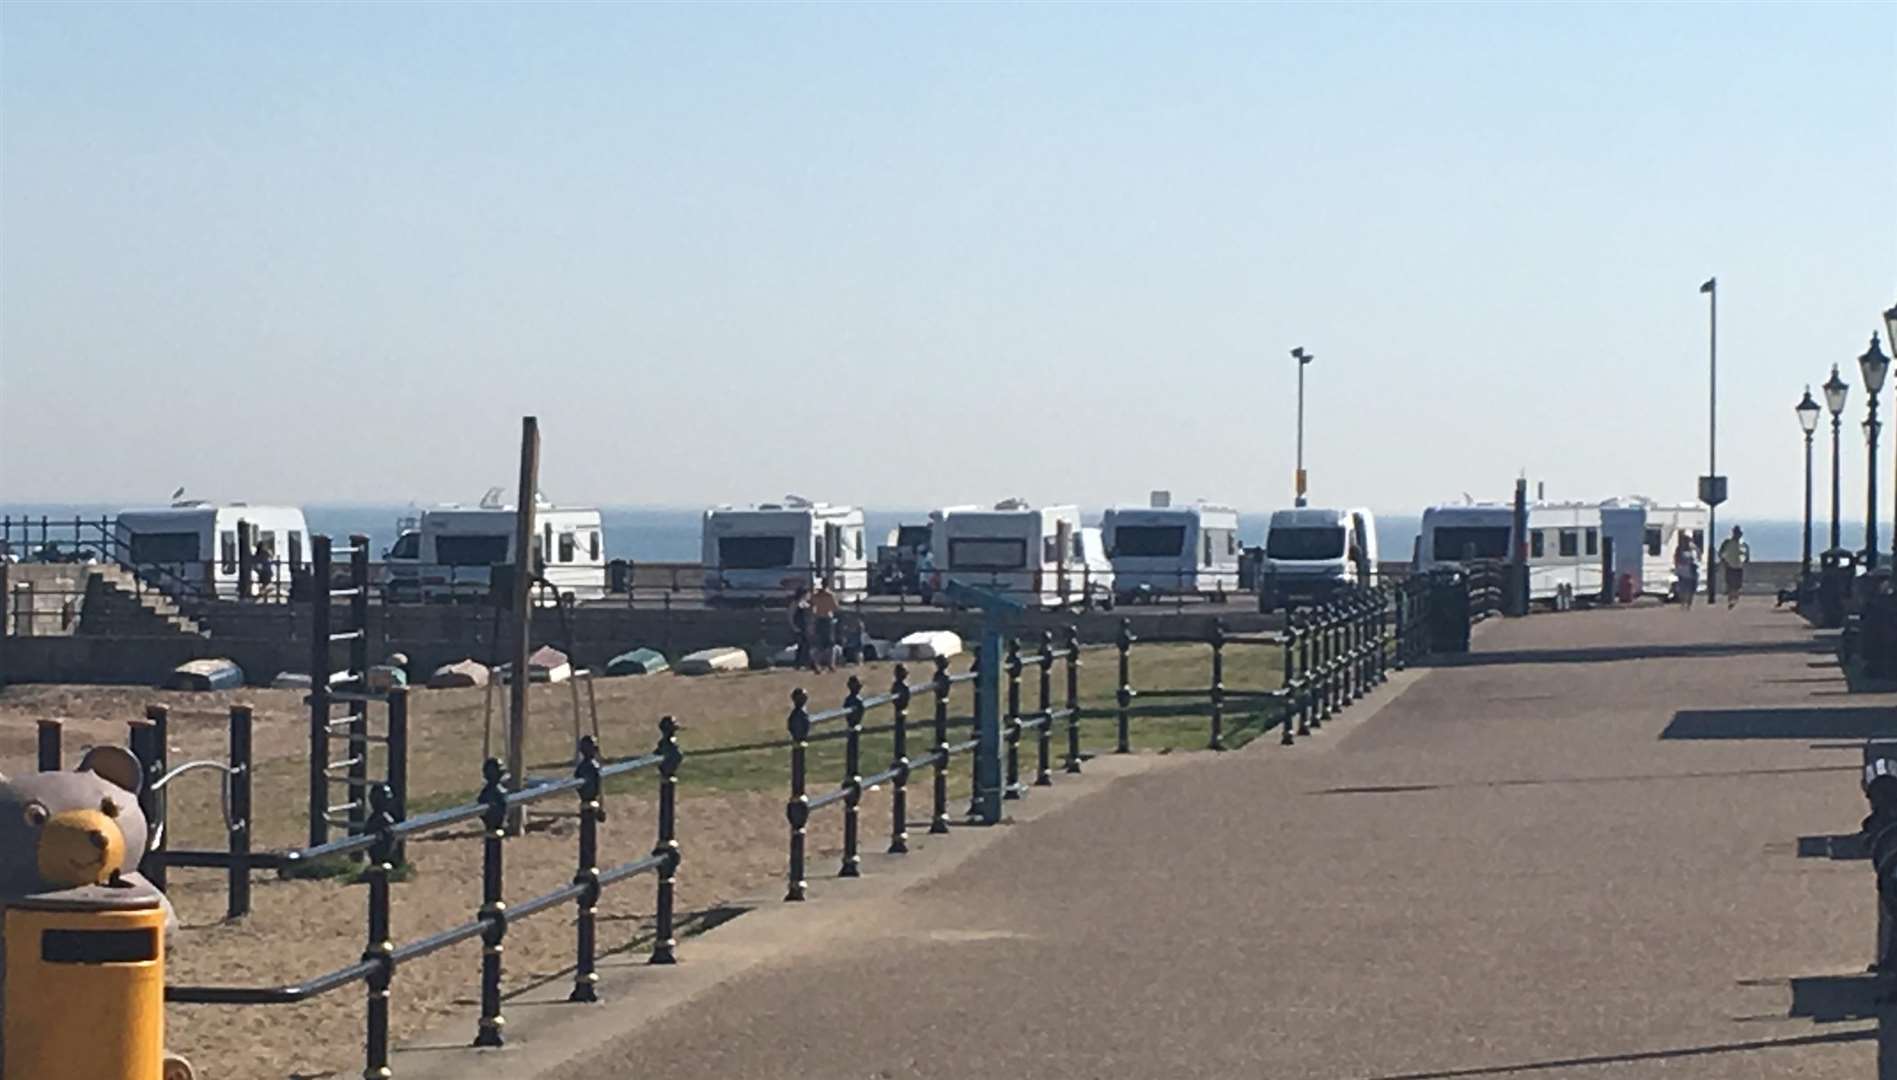 Travellers have arrived on the Neptune car park in Herne Bay